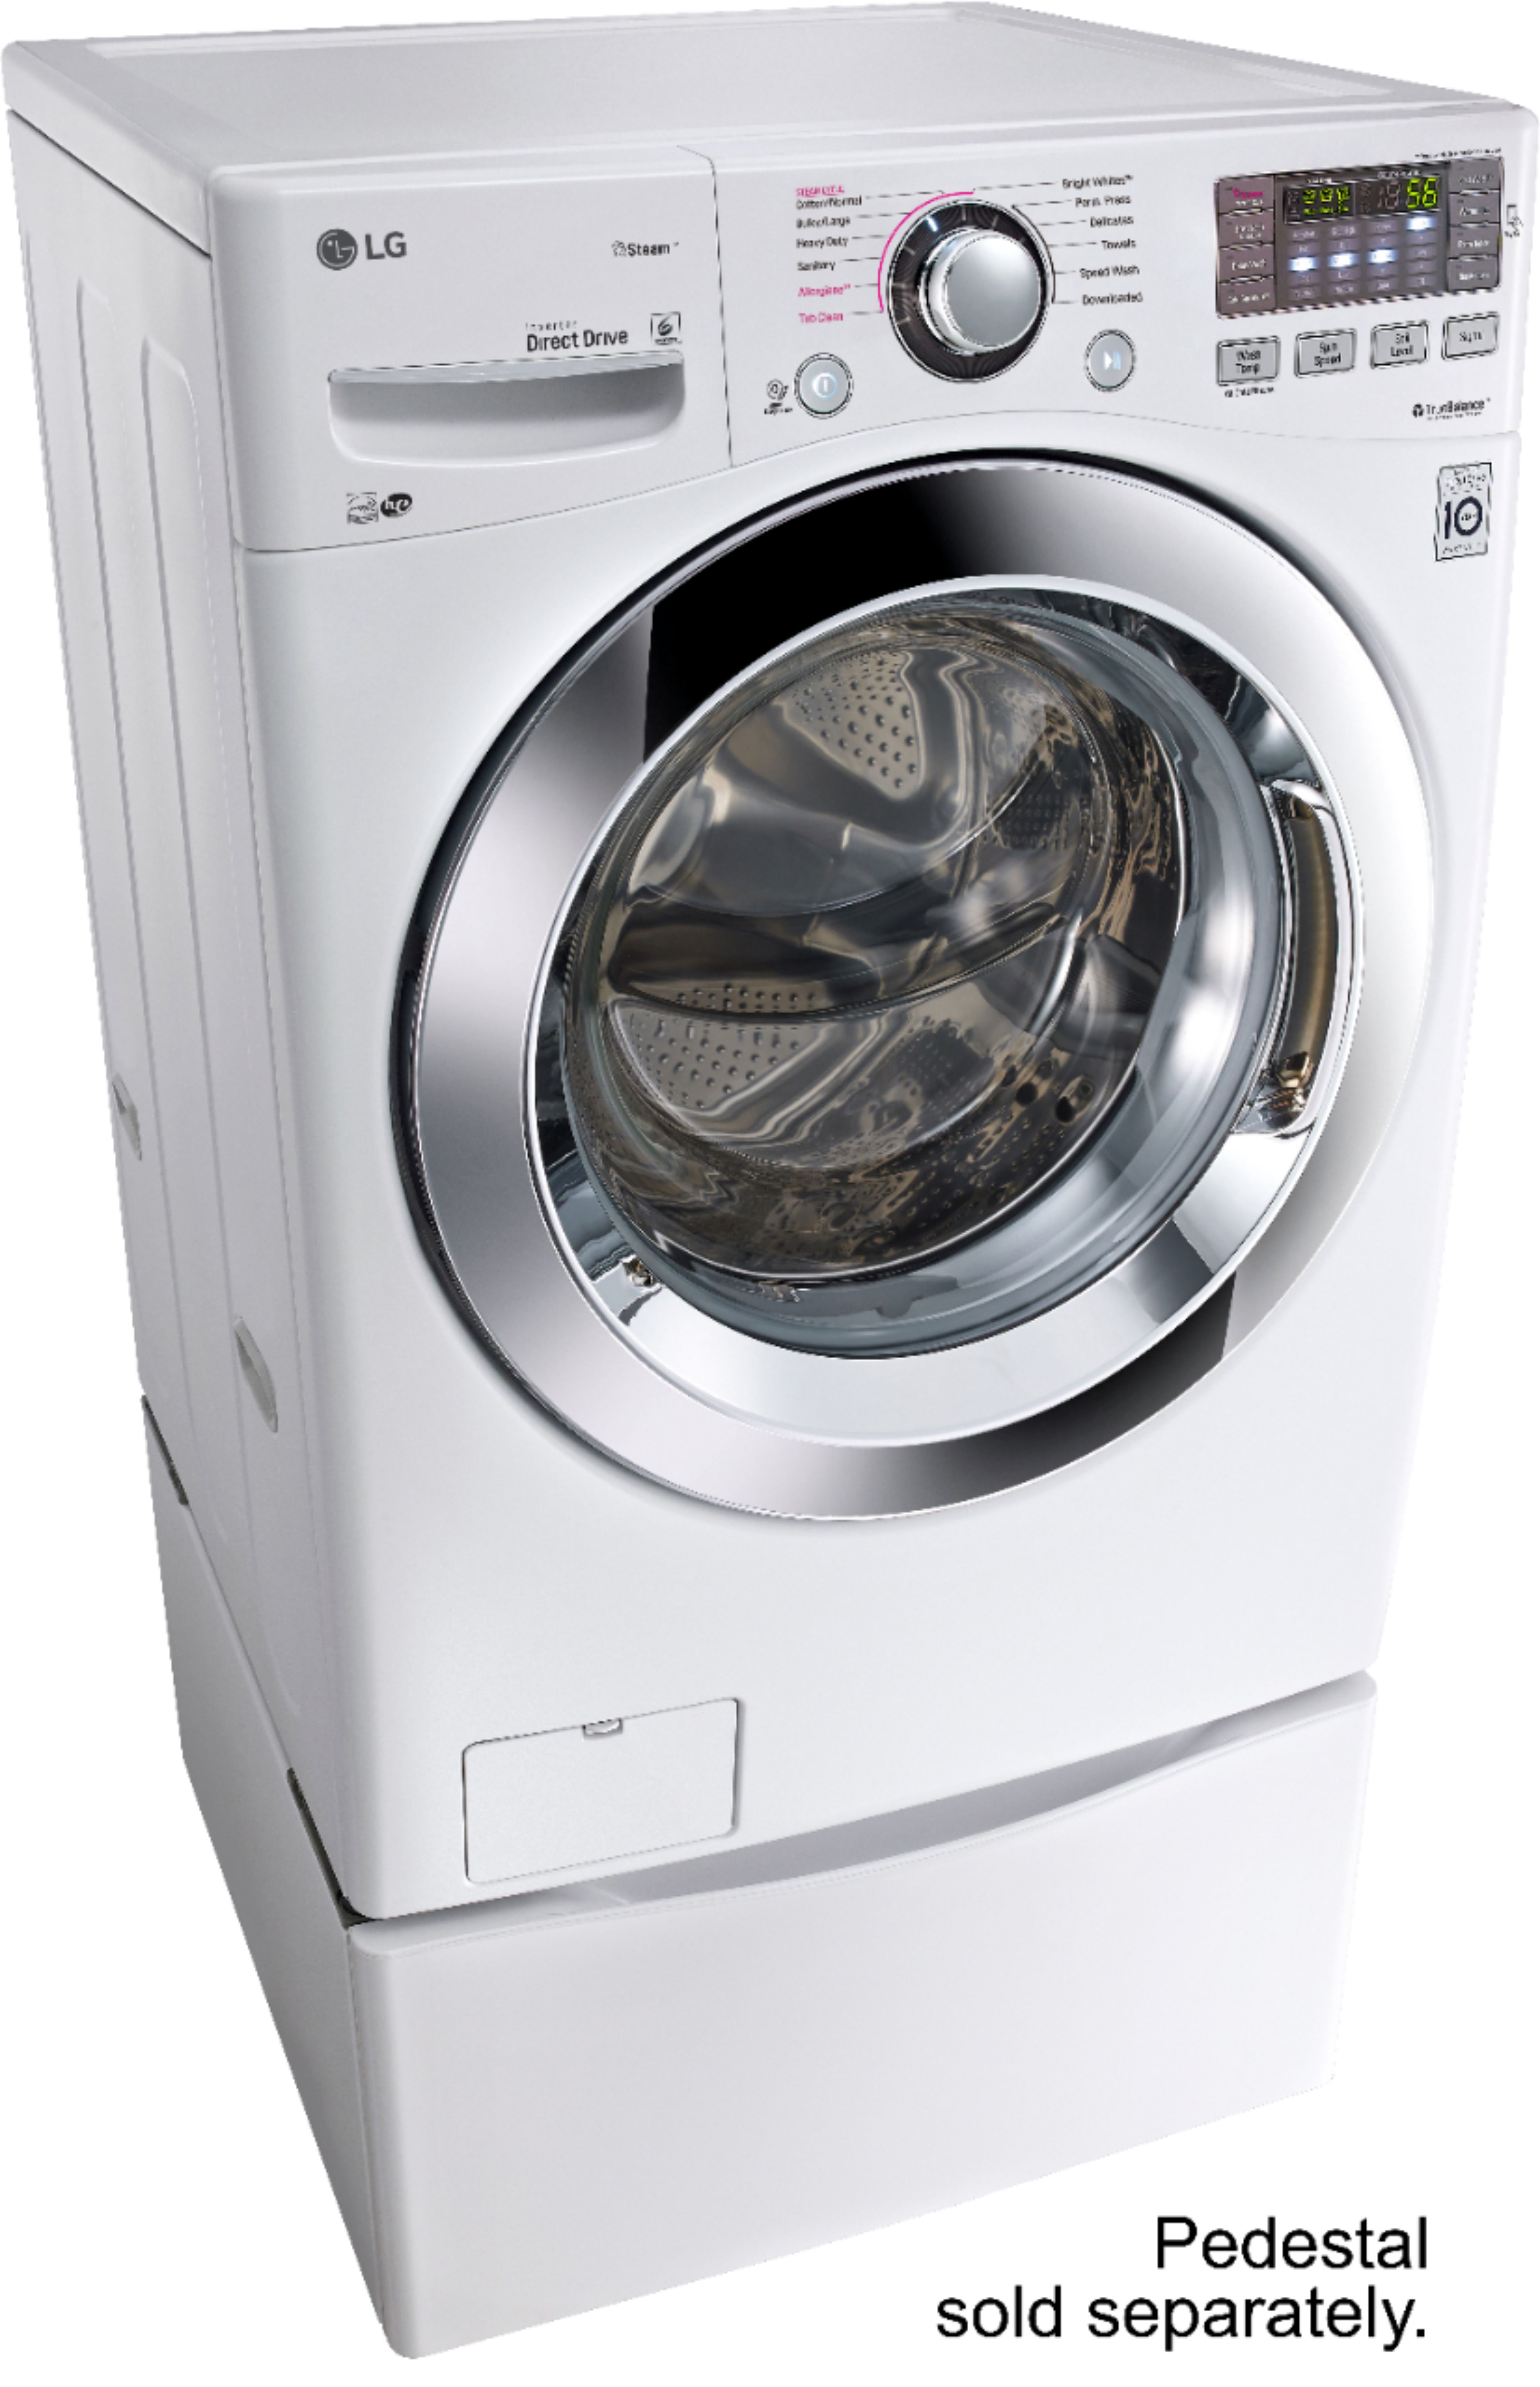 4.5 cu. ft. Ultra Large Capacity with Steam Technology